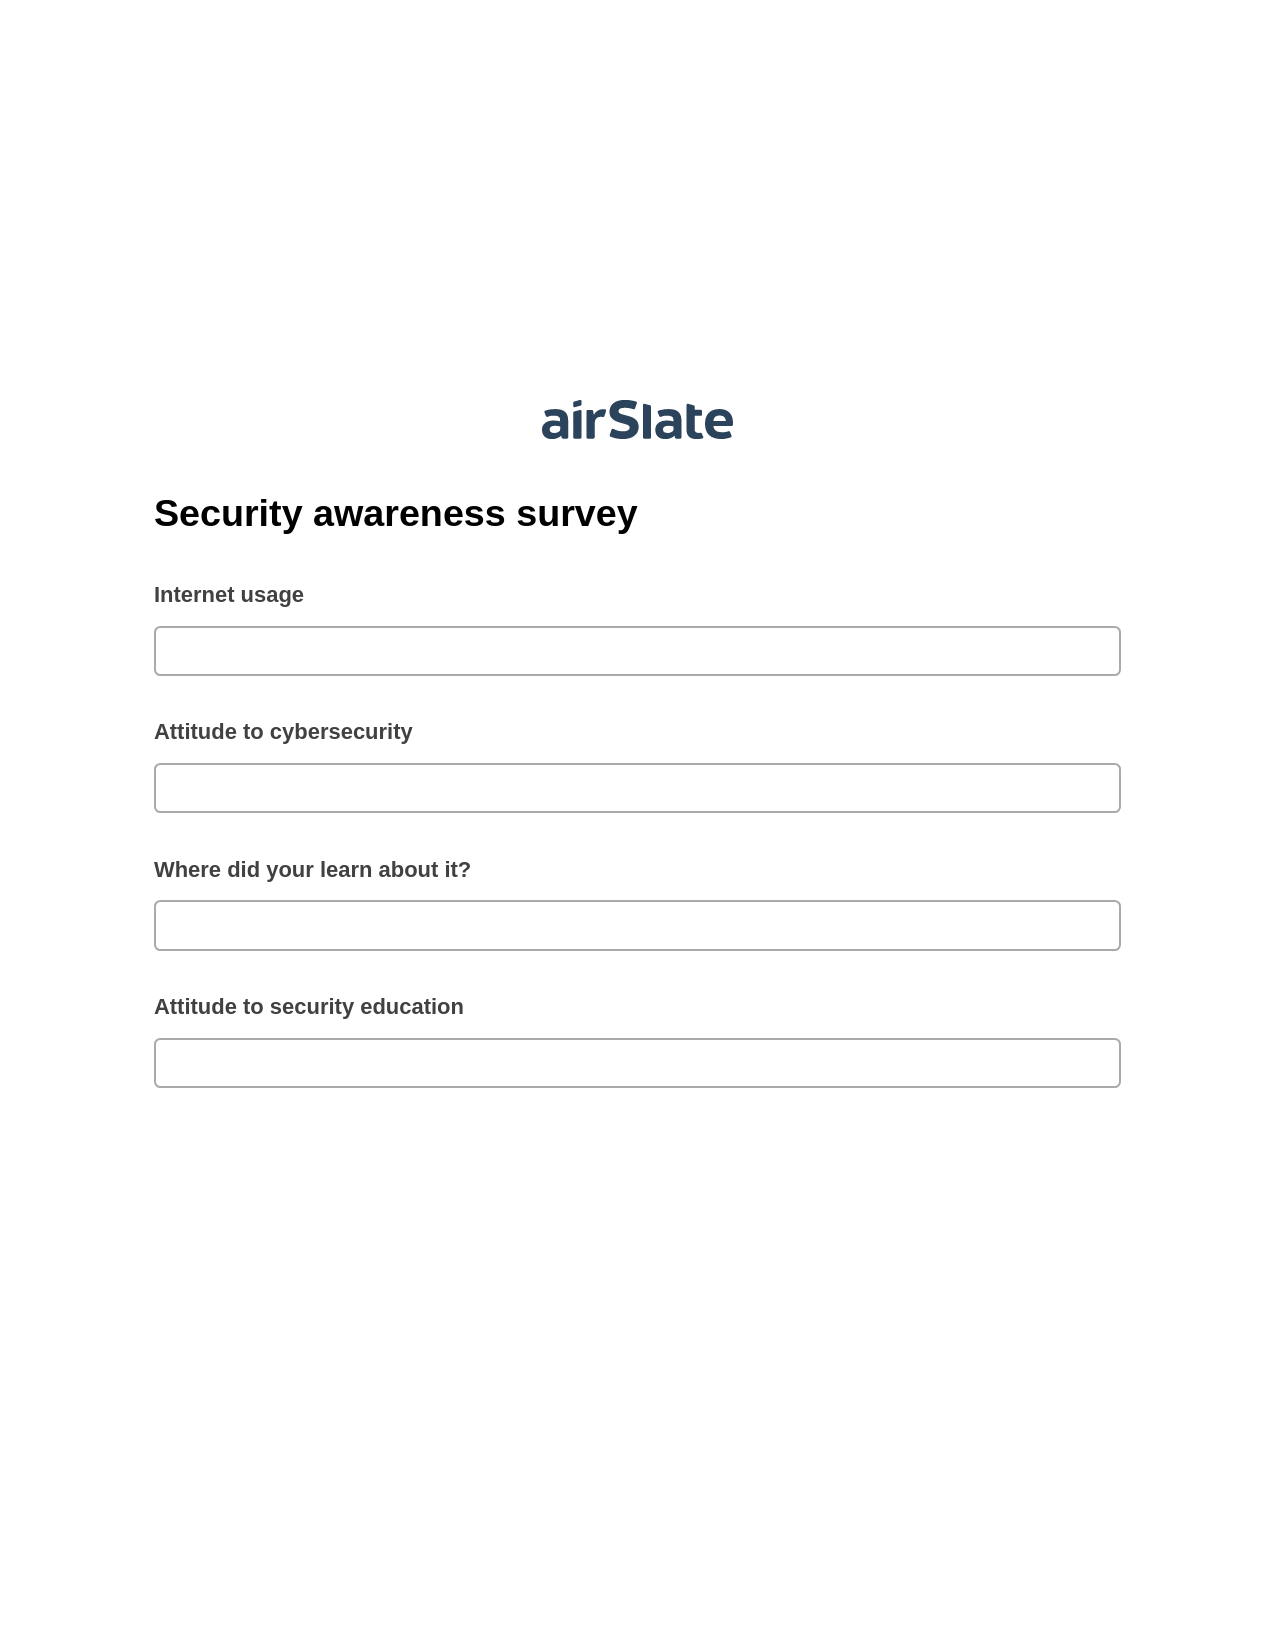 Security awareness survey Pre-fill from another Slate Bot, Open as Role Bot, Archive to SharePoint Folder Bot